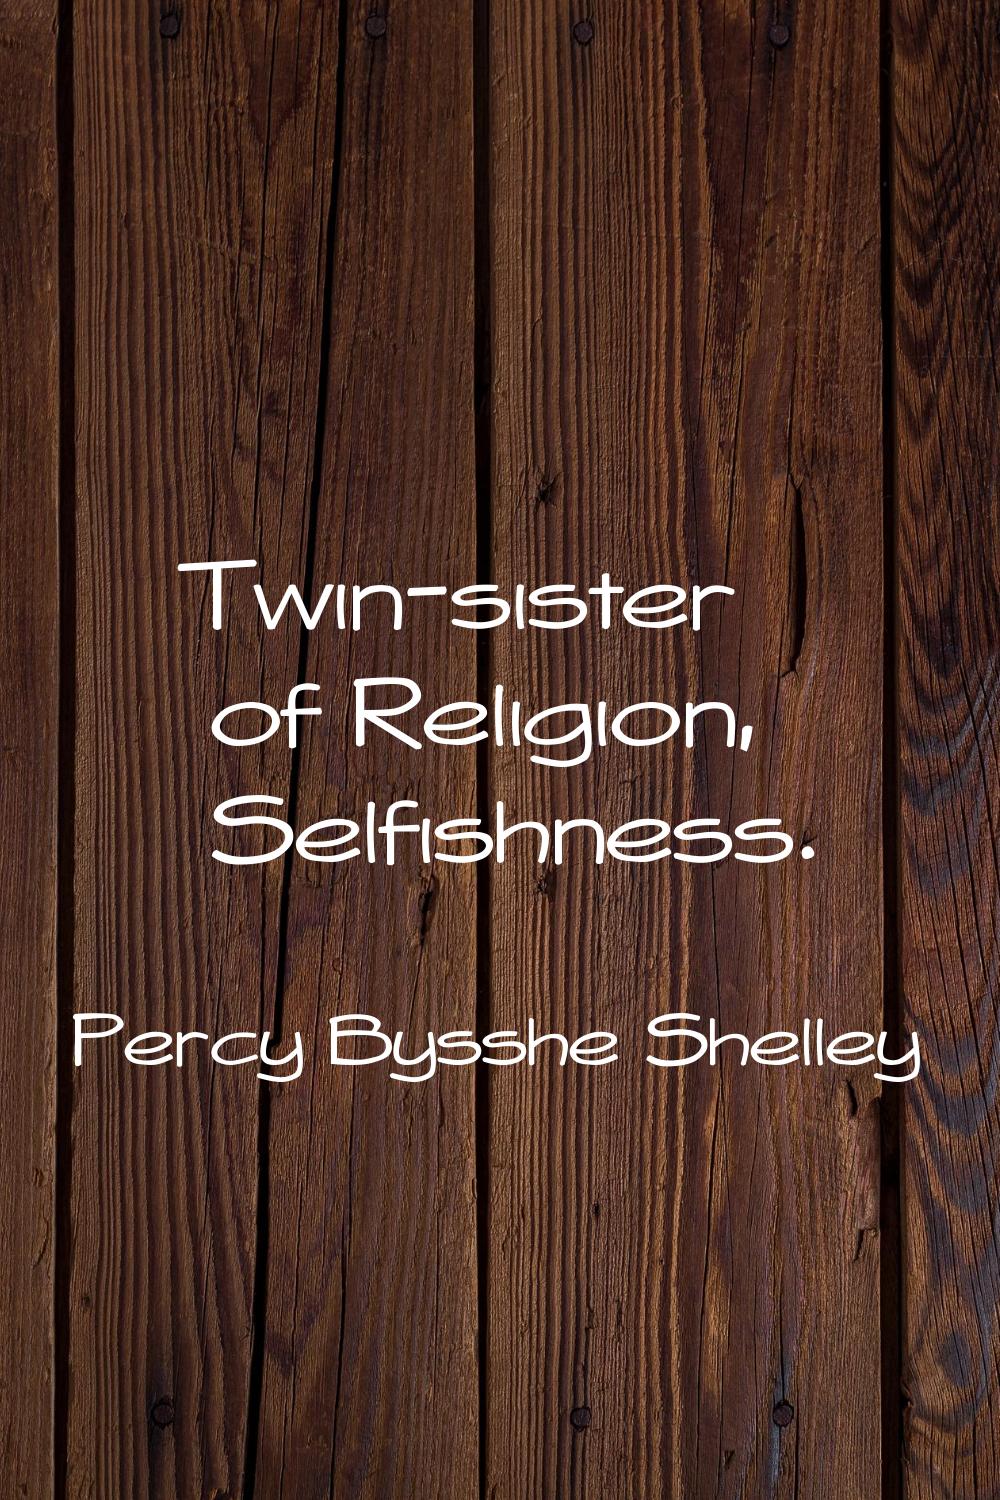 Twin-sister of Religion, Selfishness.